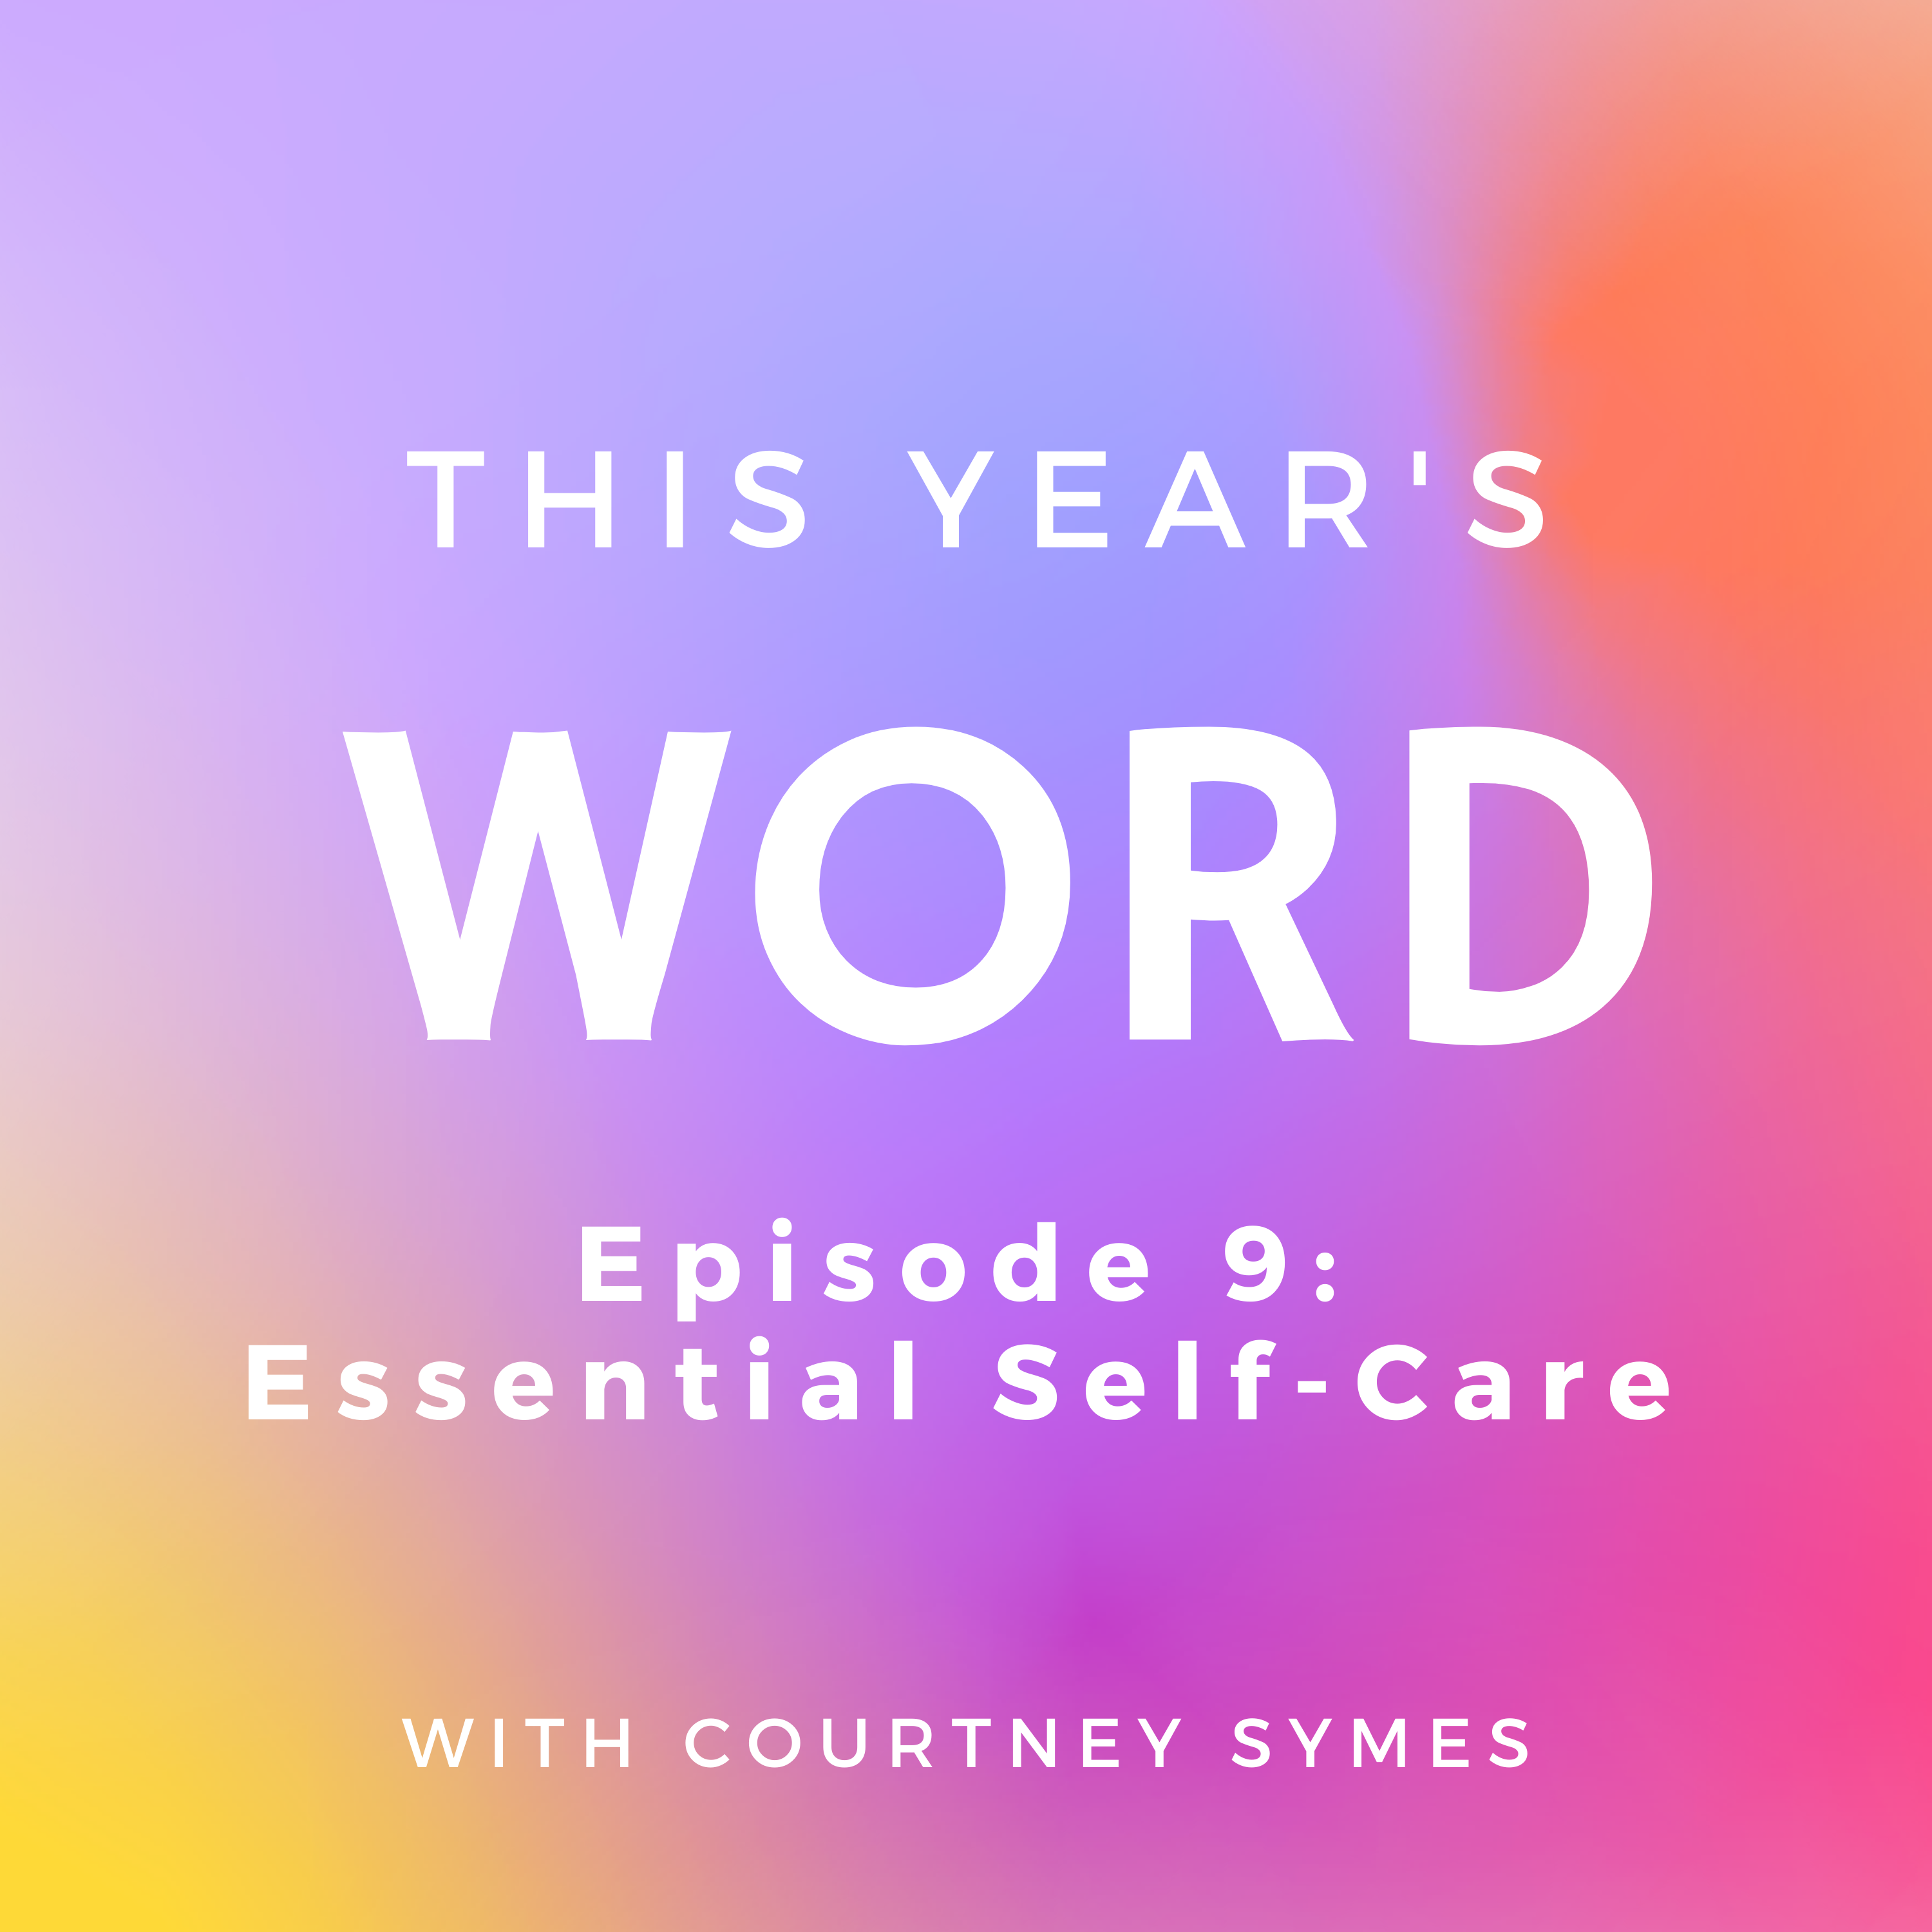 This Year’s Word Podcast Shownotes: Episode 9, Essential Self-Care